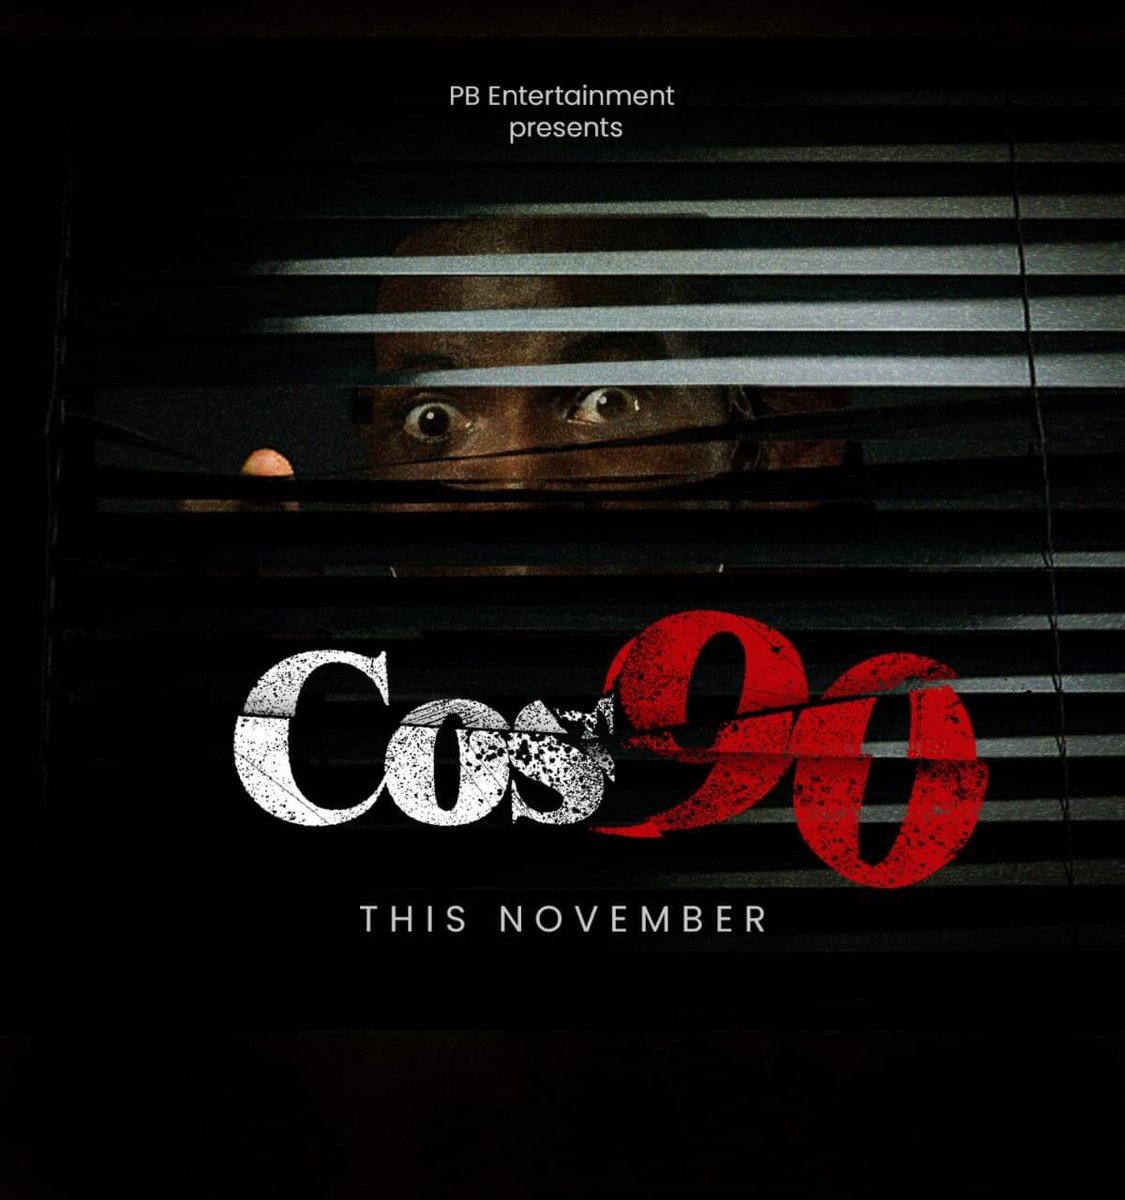 In the middle of nowhere
.
No Family
.
No friends
.
An attempted Murder investigation 
.
All evidence points to you.
.
#Cos90
#nationaltheatreofghana
#ThisNovember